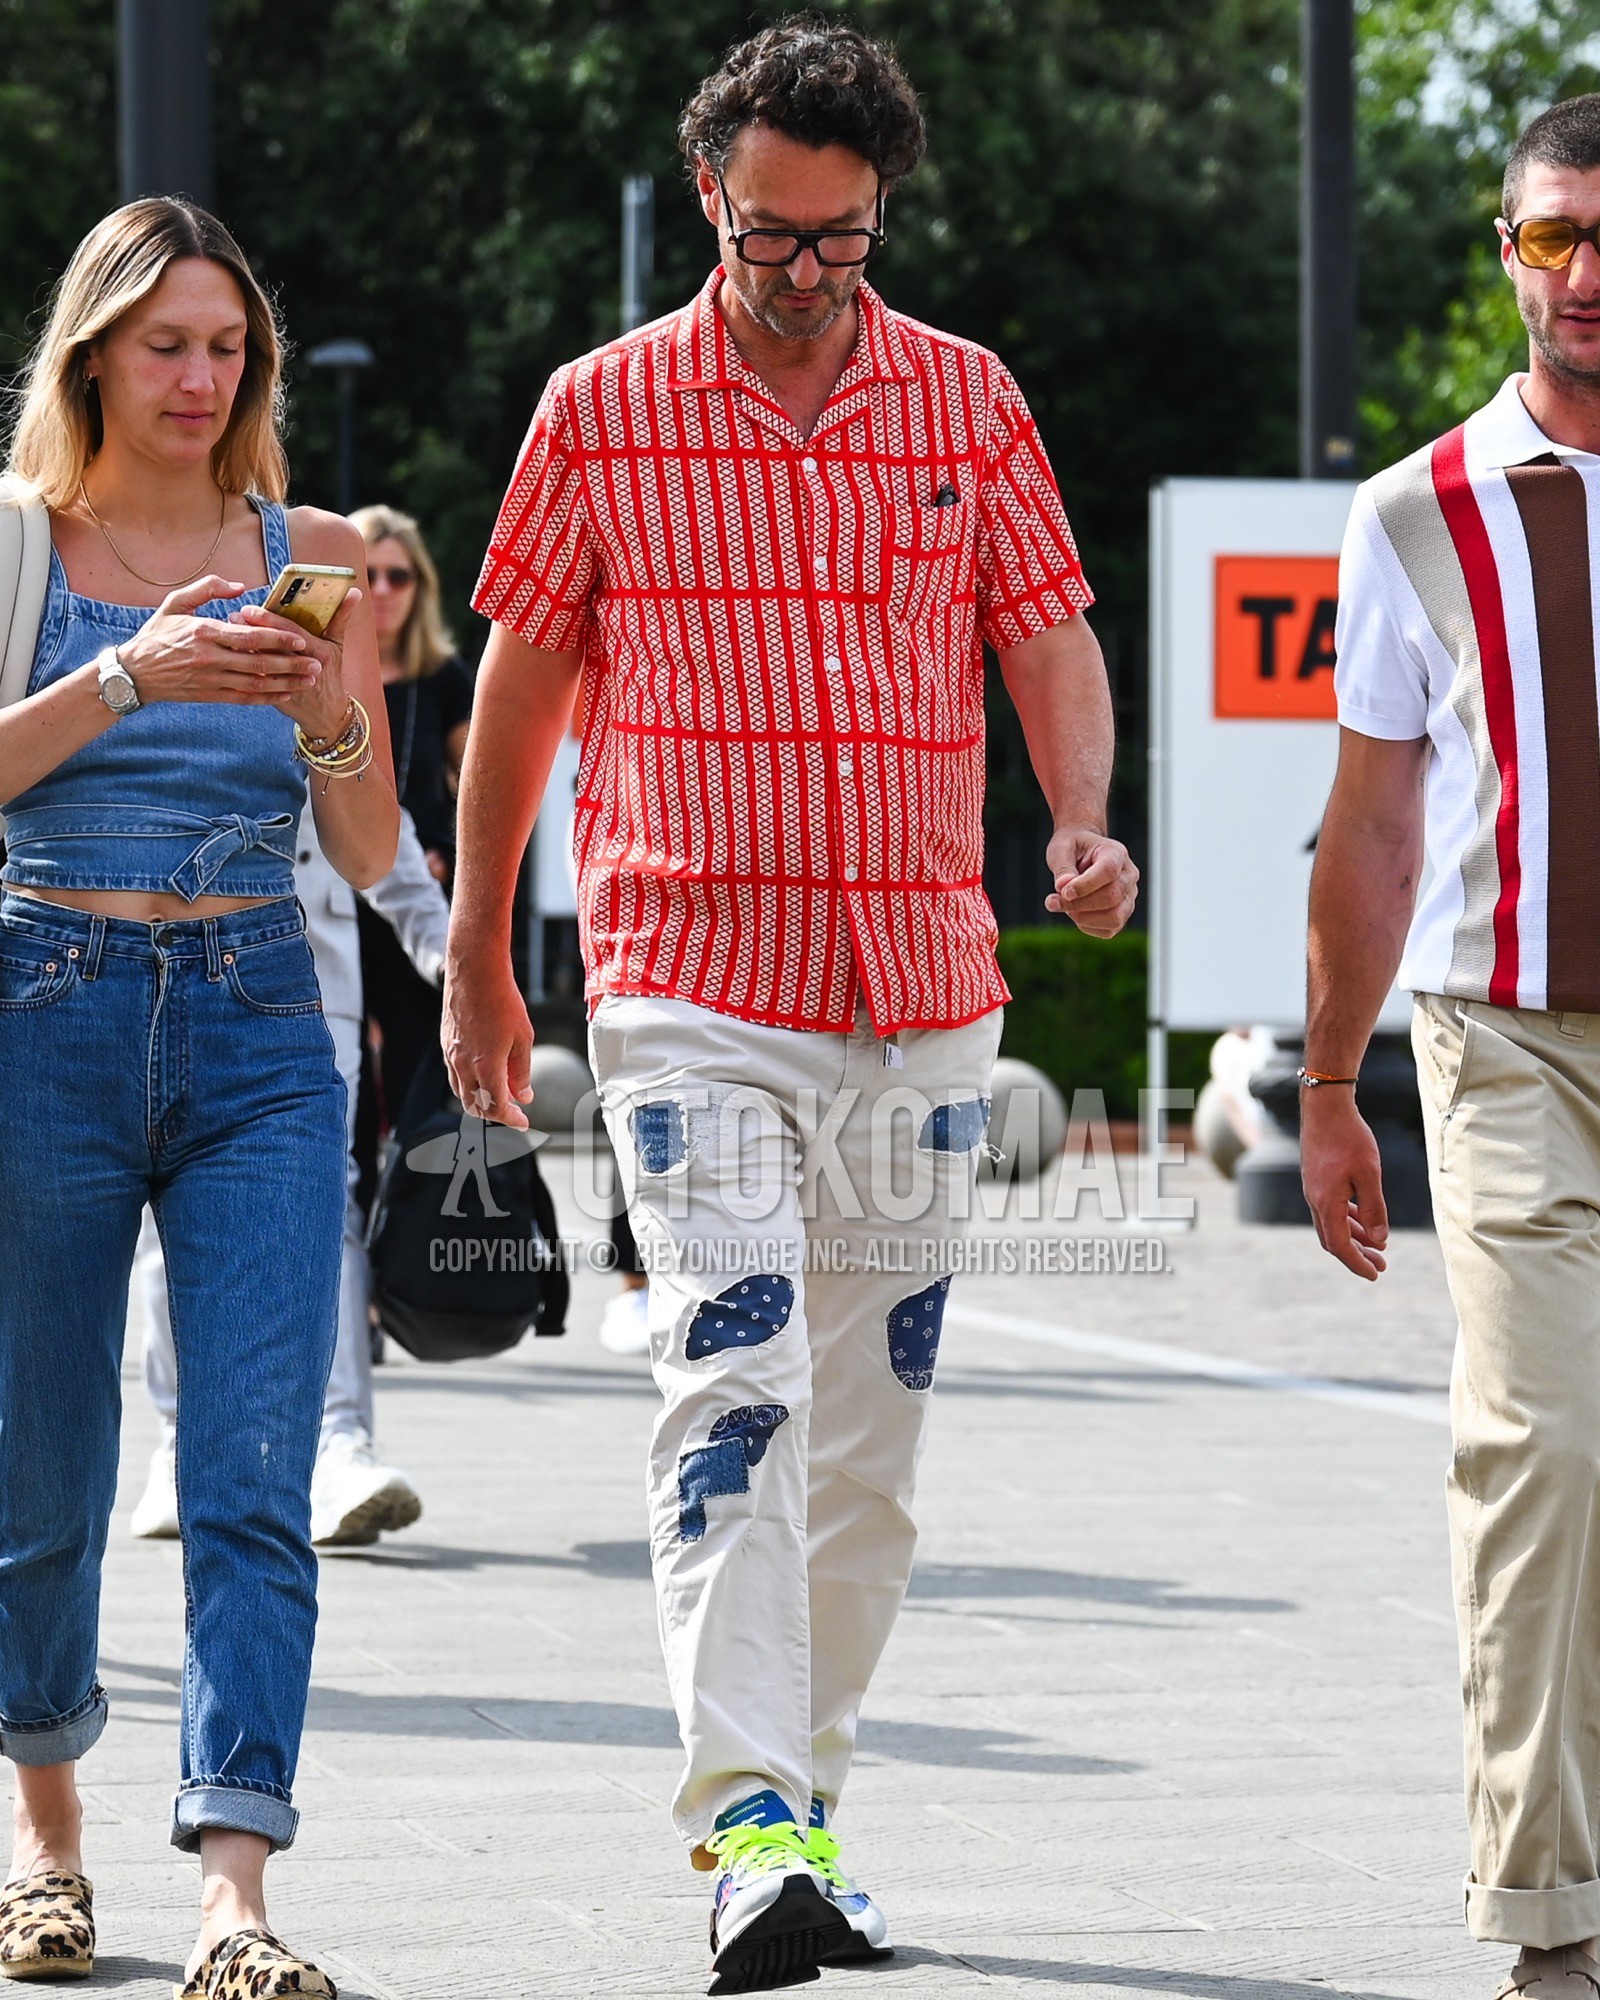 Men's spring summer outfit with orange plain sunglasses, red check shirt, white plain damaged jeans, white low-cut sneakers.